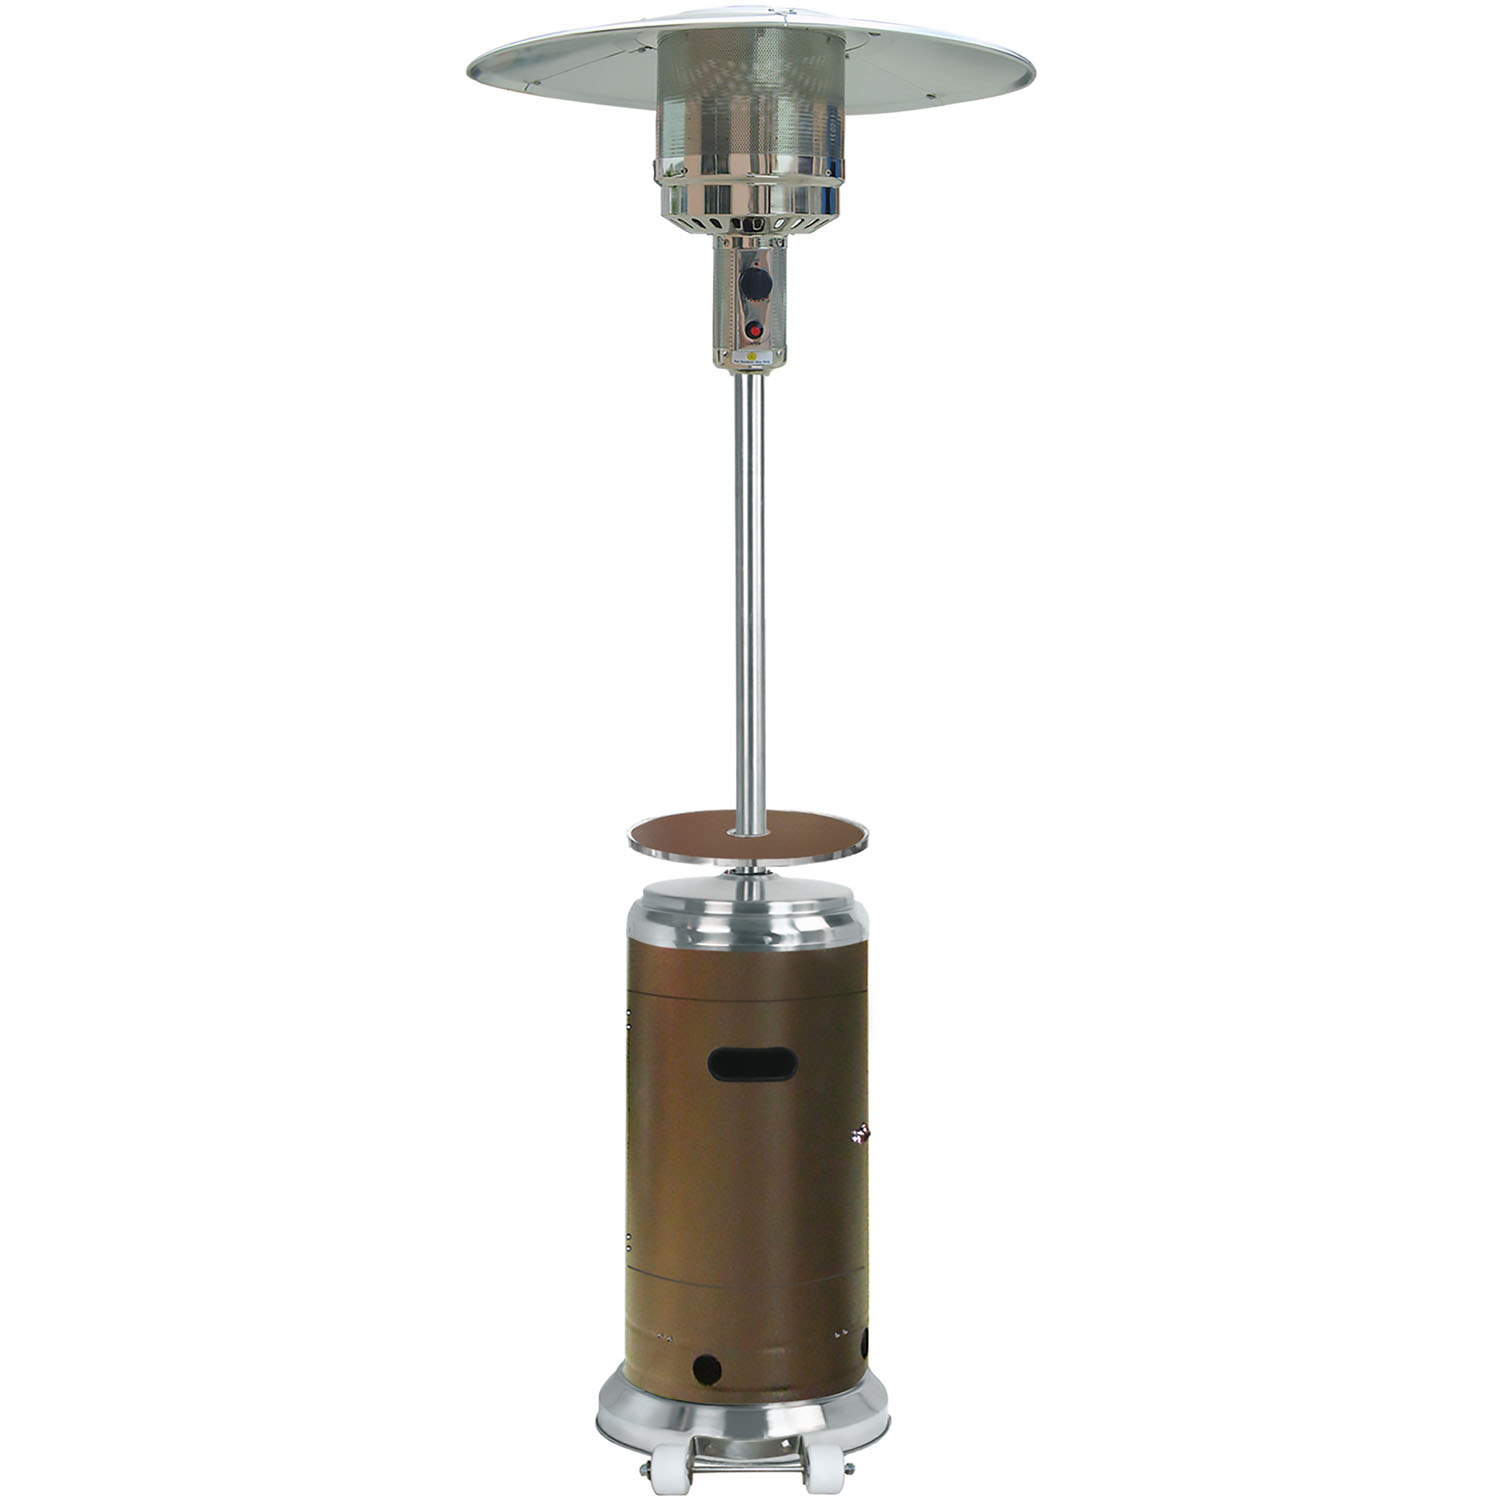 Hanover 7-Ft. 48,000 BTU Steel Umbrella Propane Patio Heater in Bronze, Stainless Steel with Weather-Protective Cover | Outdoor Heating for Patio, Backyard, Deck, Porch | Caster Wheels | HAN002BRSS-CV - image 5 of 9